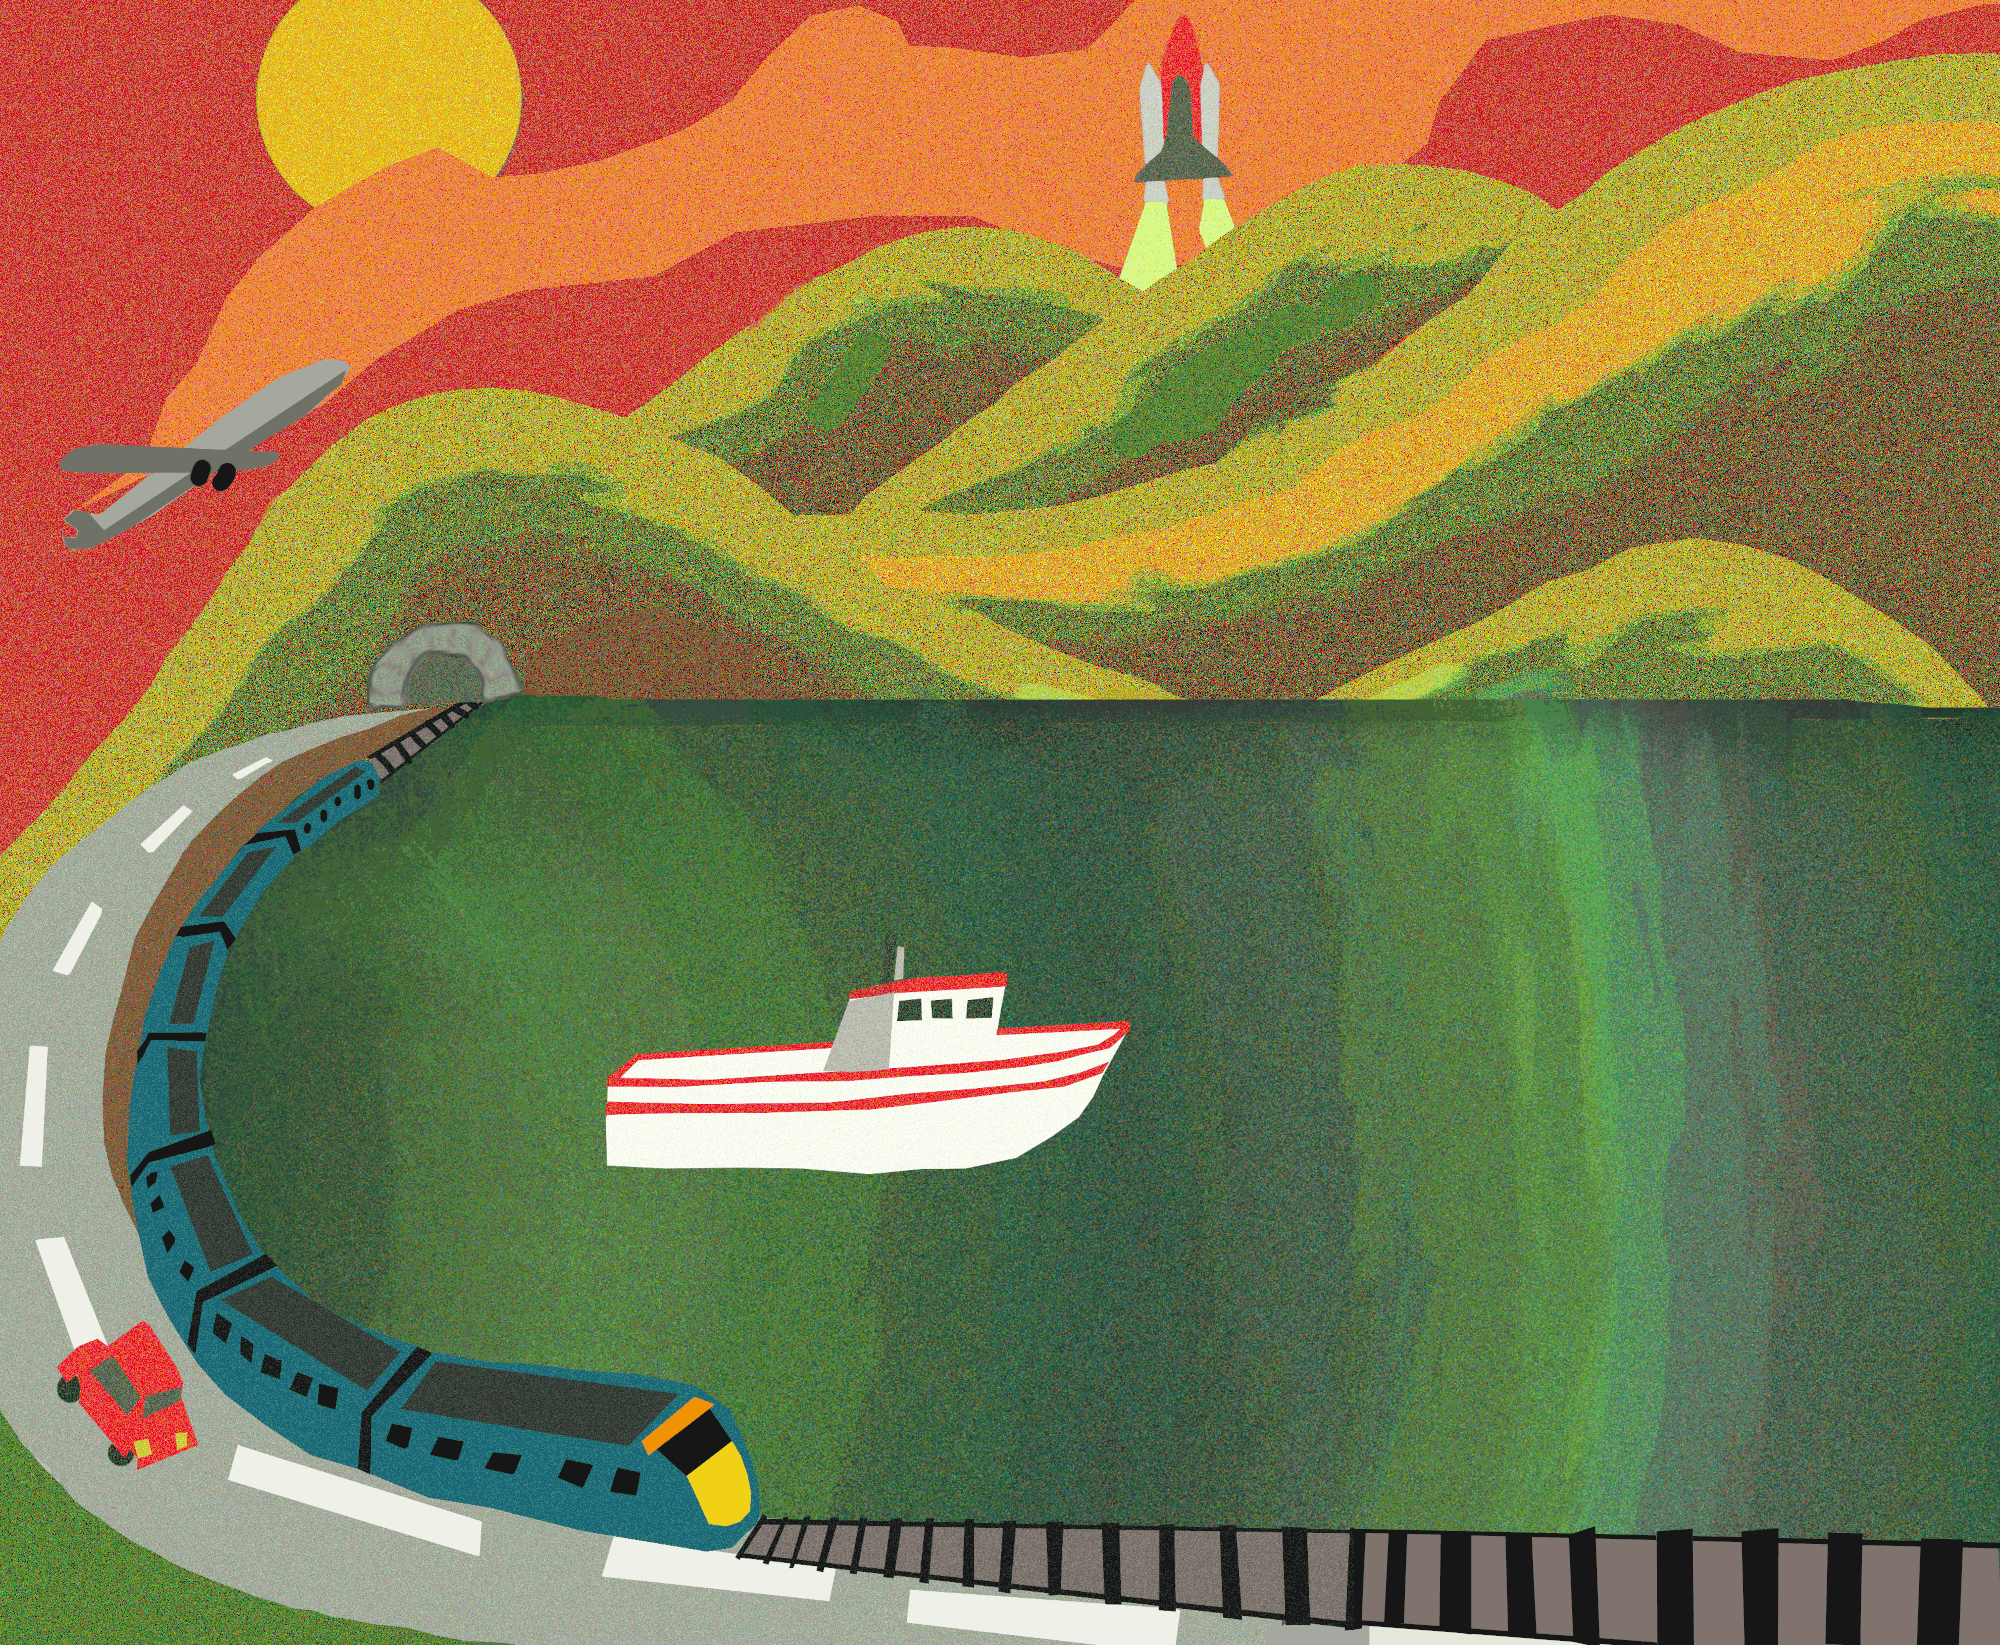 A digital illustration of a train, a car, a boat, a plane, and a rocket ship all travelling around a countryside scene with a large lake, central. The sky is a red colour.